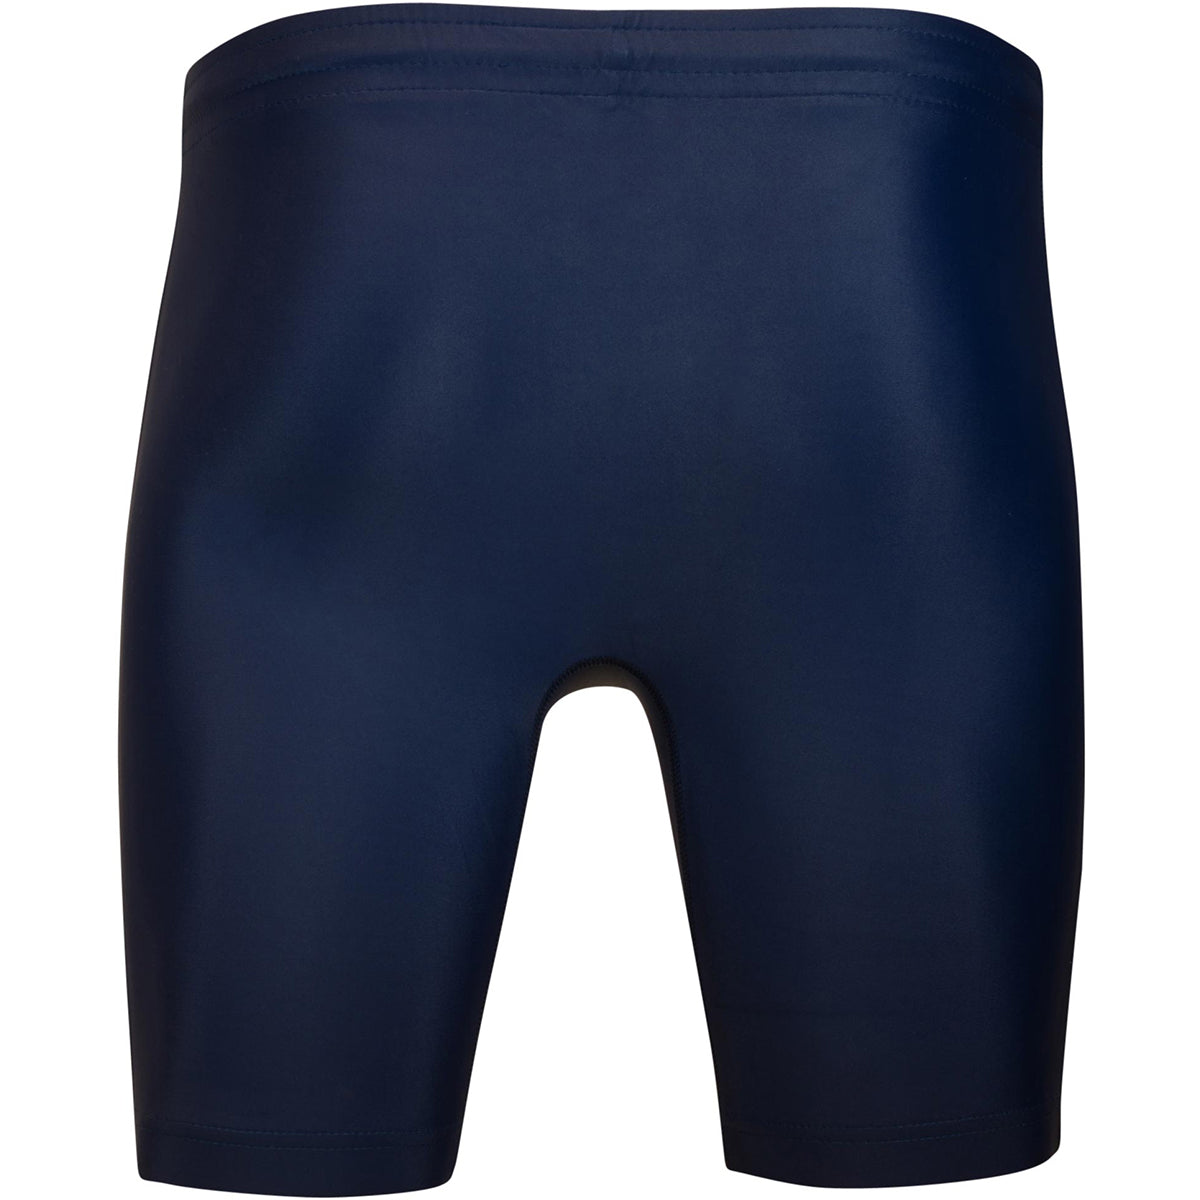 Cliff Keen Compression Gear Workout Shorts - Black Cliff Keen